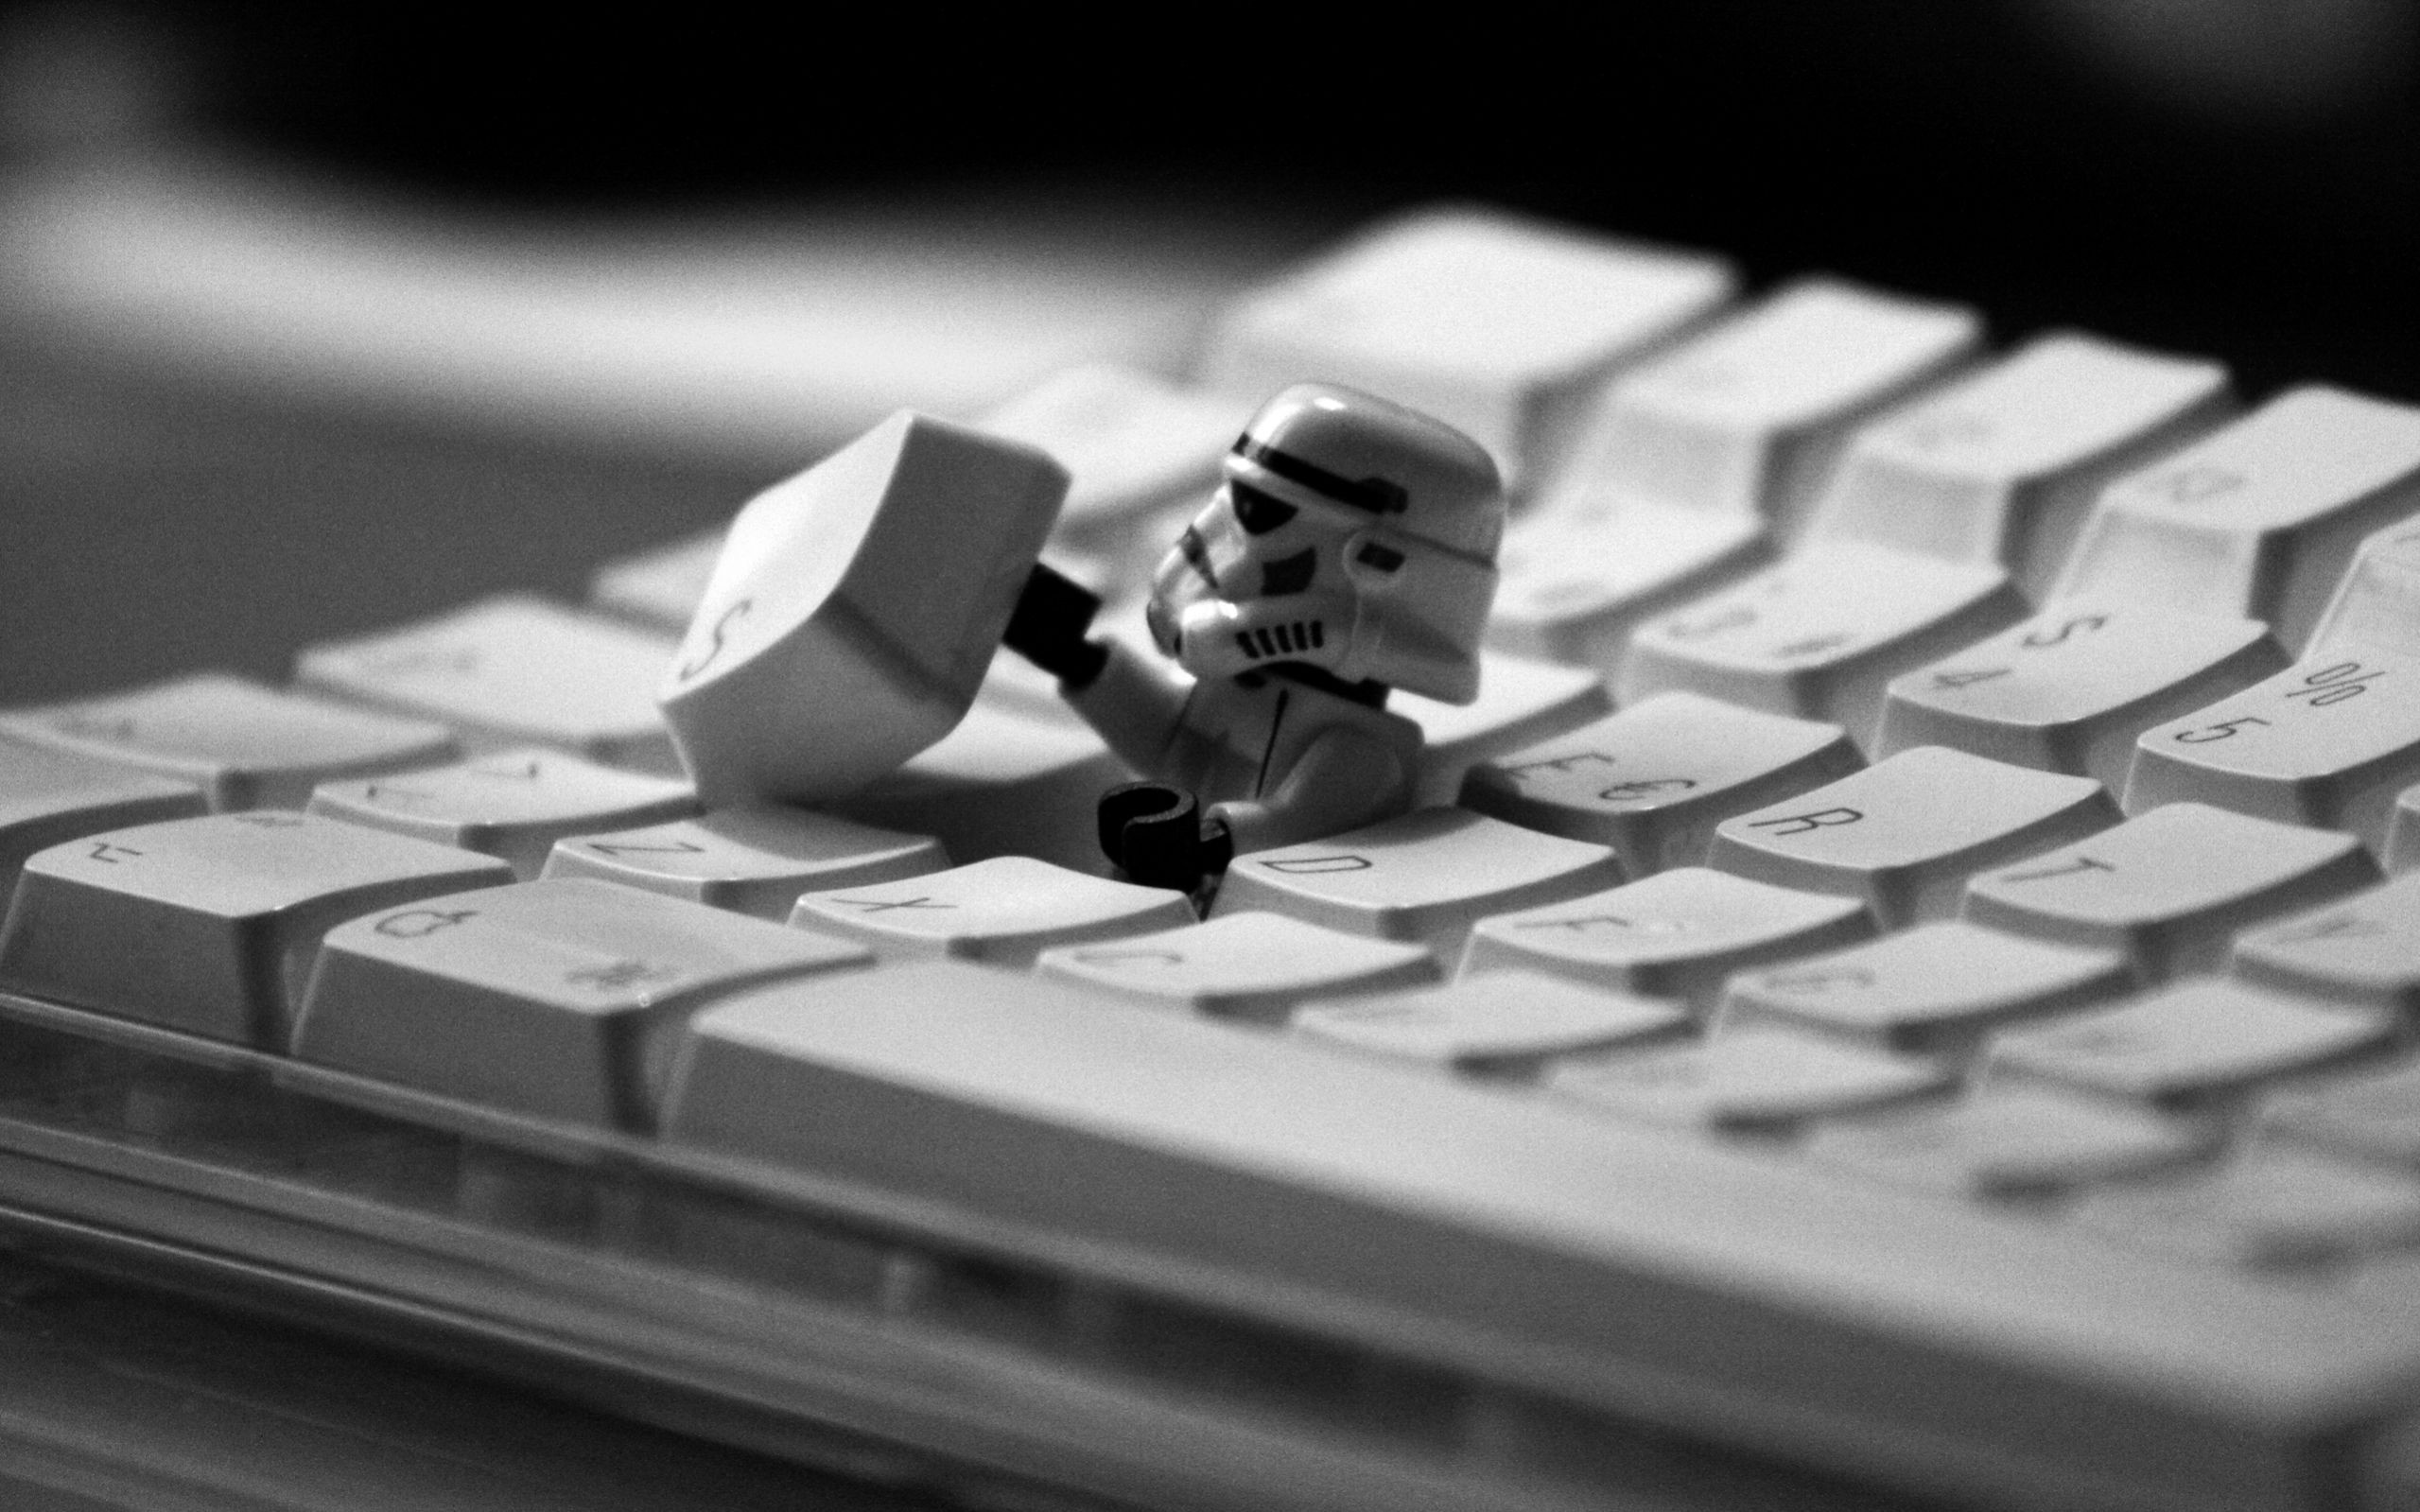 Darth Vader Comes Out From Keyboard Funny Wallpaper - Cool Lego Backgrounds - HD Wallpaper 